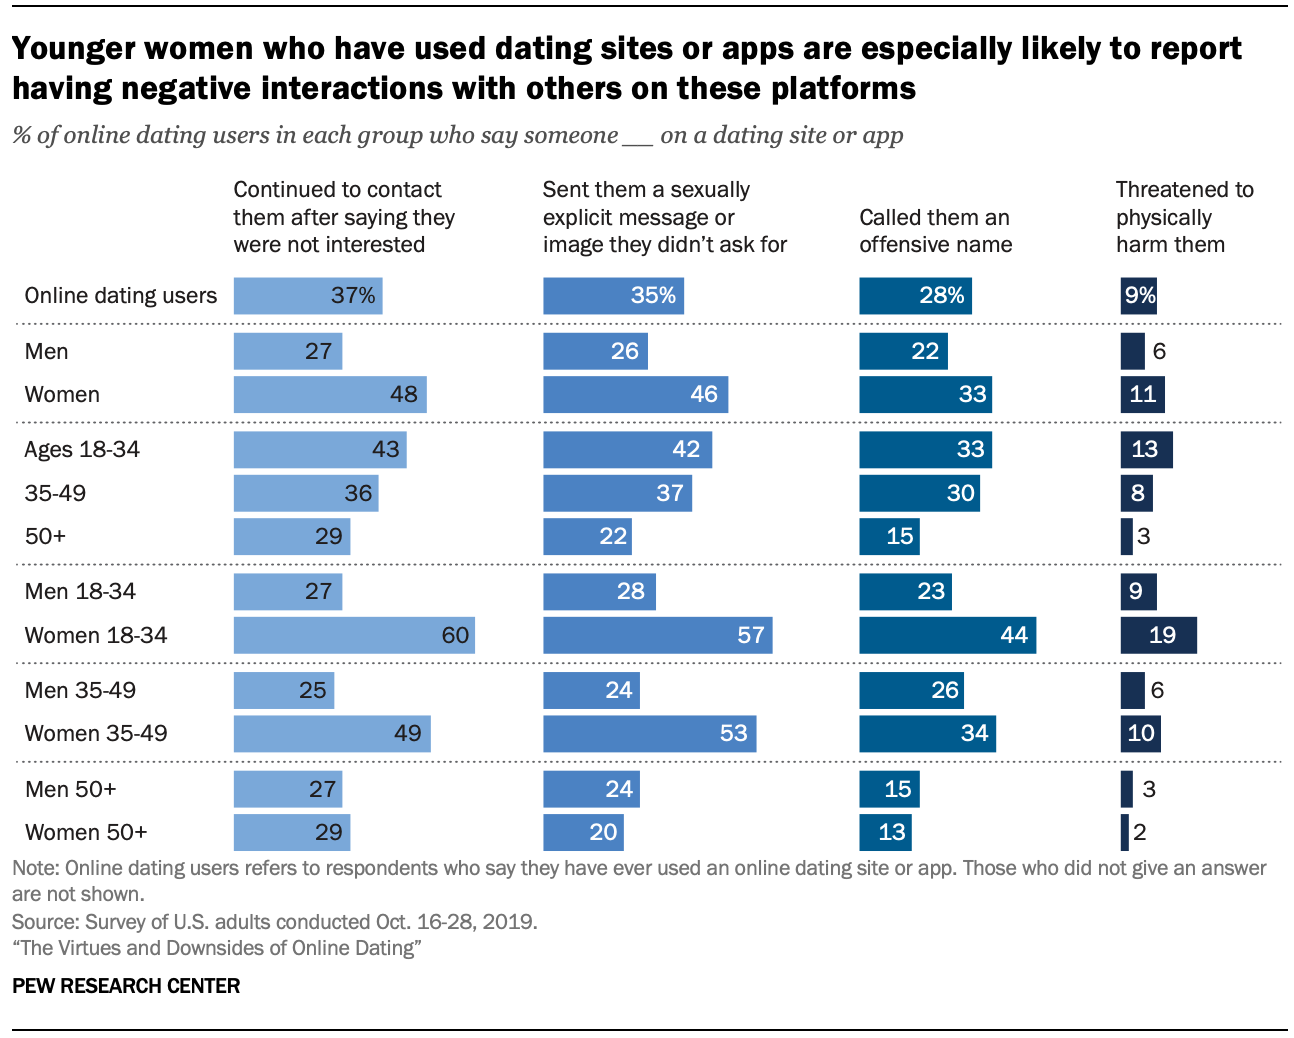 Online Dating: The Virtues and Downsides | Pew Research Center